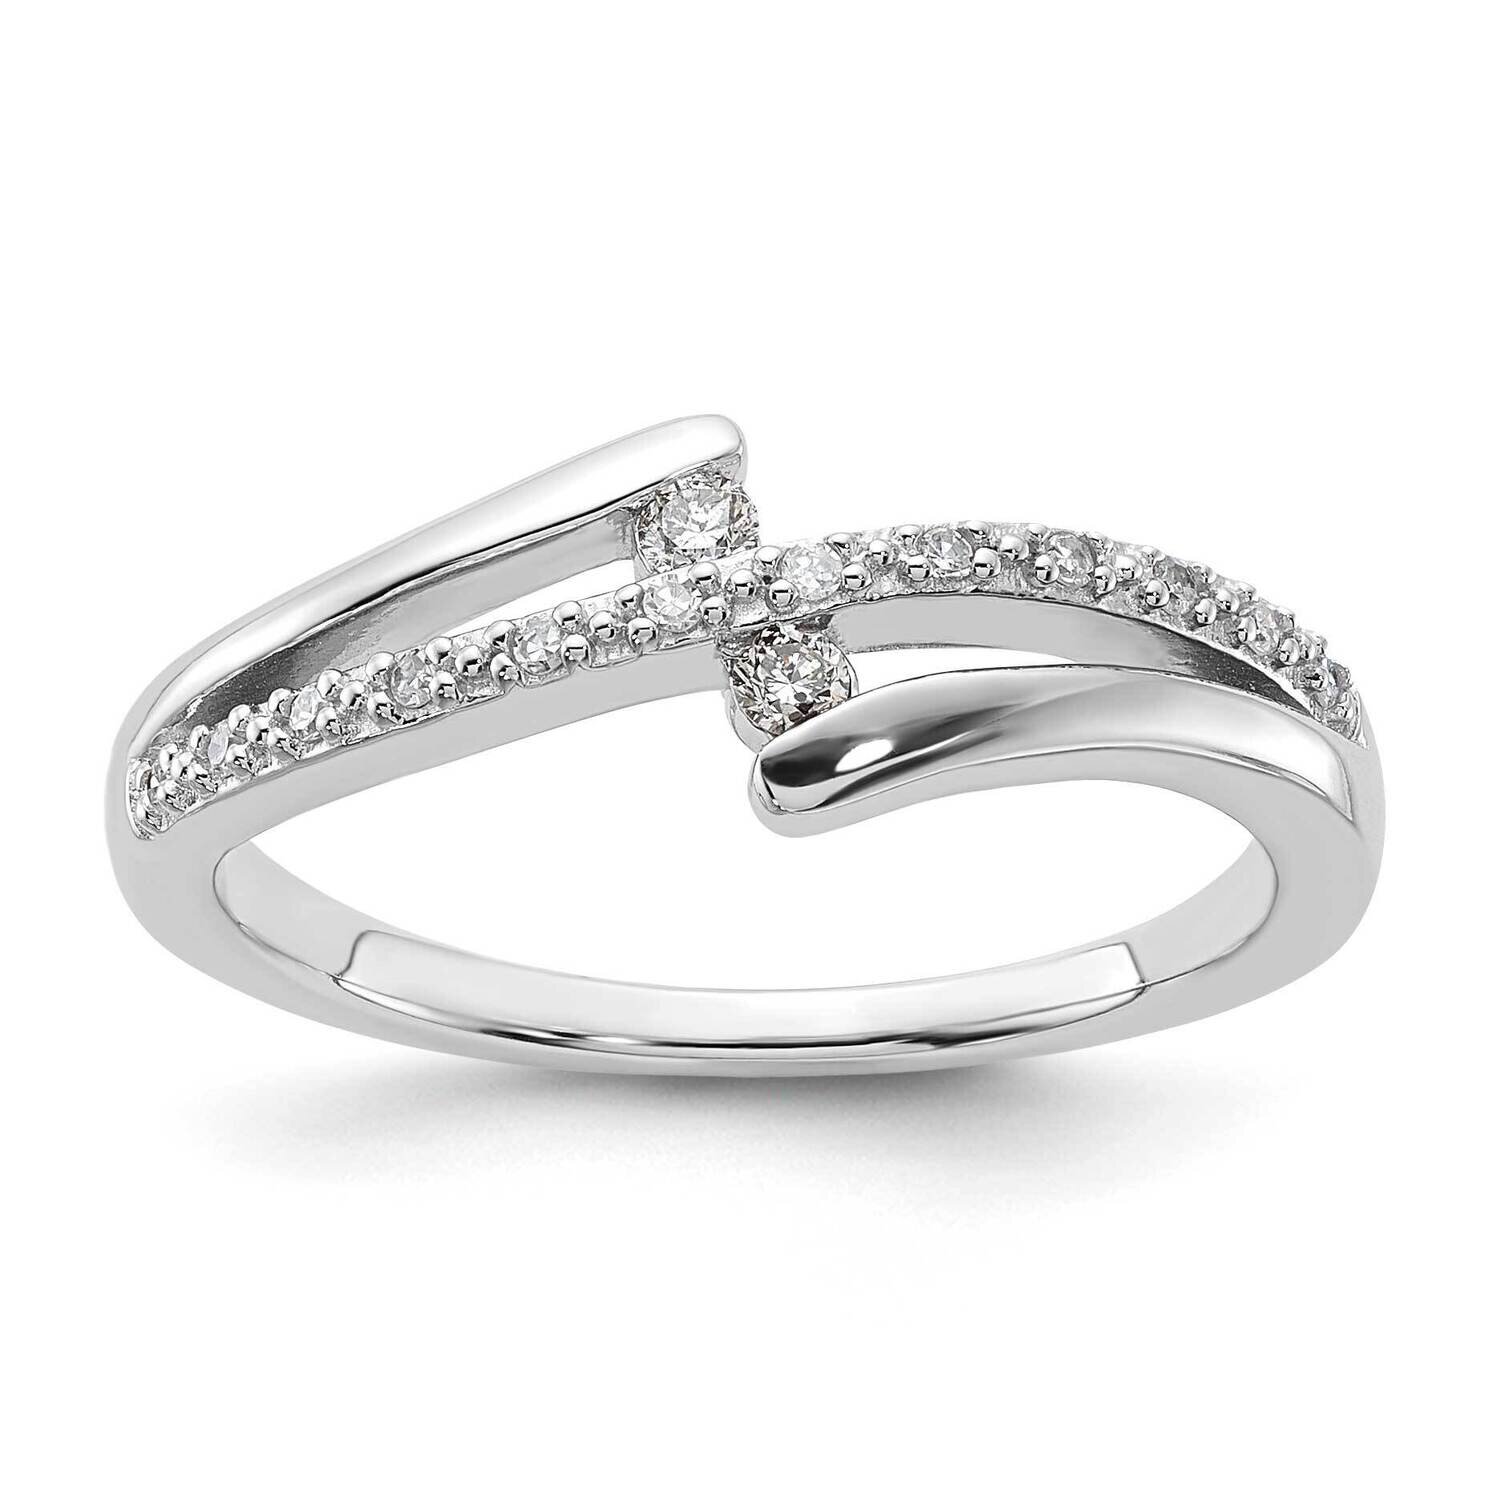 Sterling Silver Polished Fancy Diamond Ring RLD3996-SSABS43-7